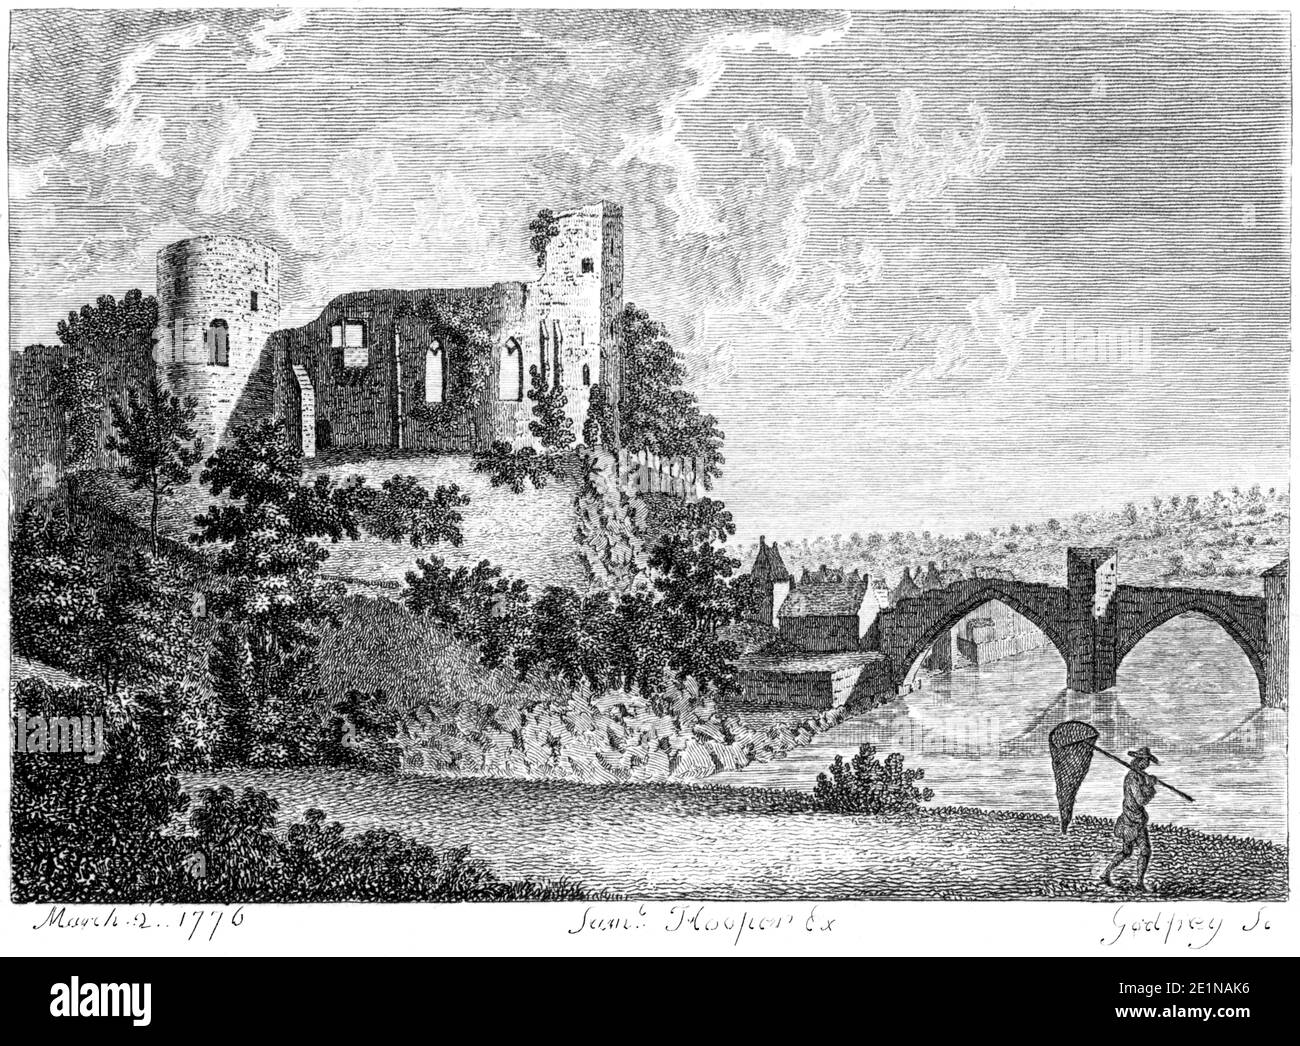 An engraving of Bernerds Castle (Barnard Castle) published March 2 1776  scanned at high resolution from a book published in the 1770s. Stock Photo